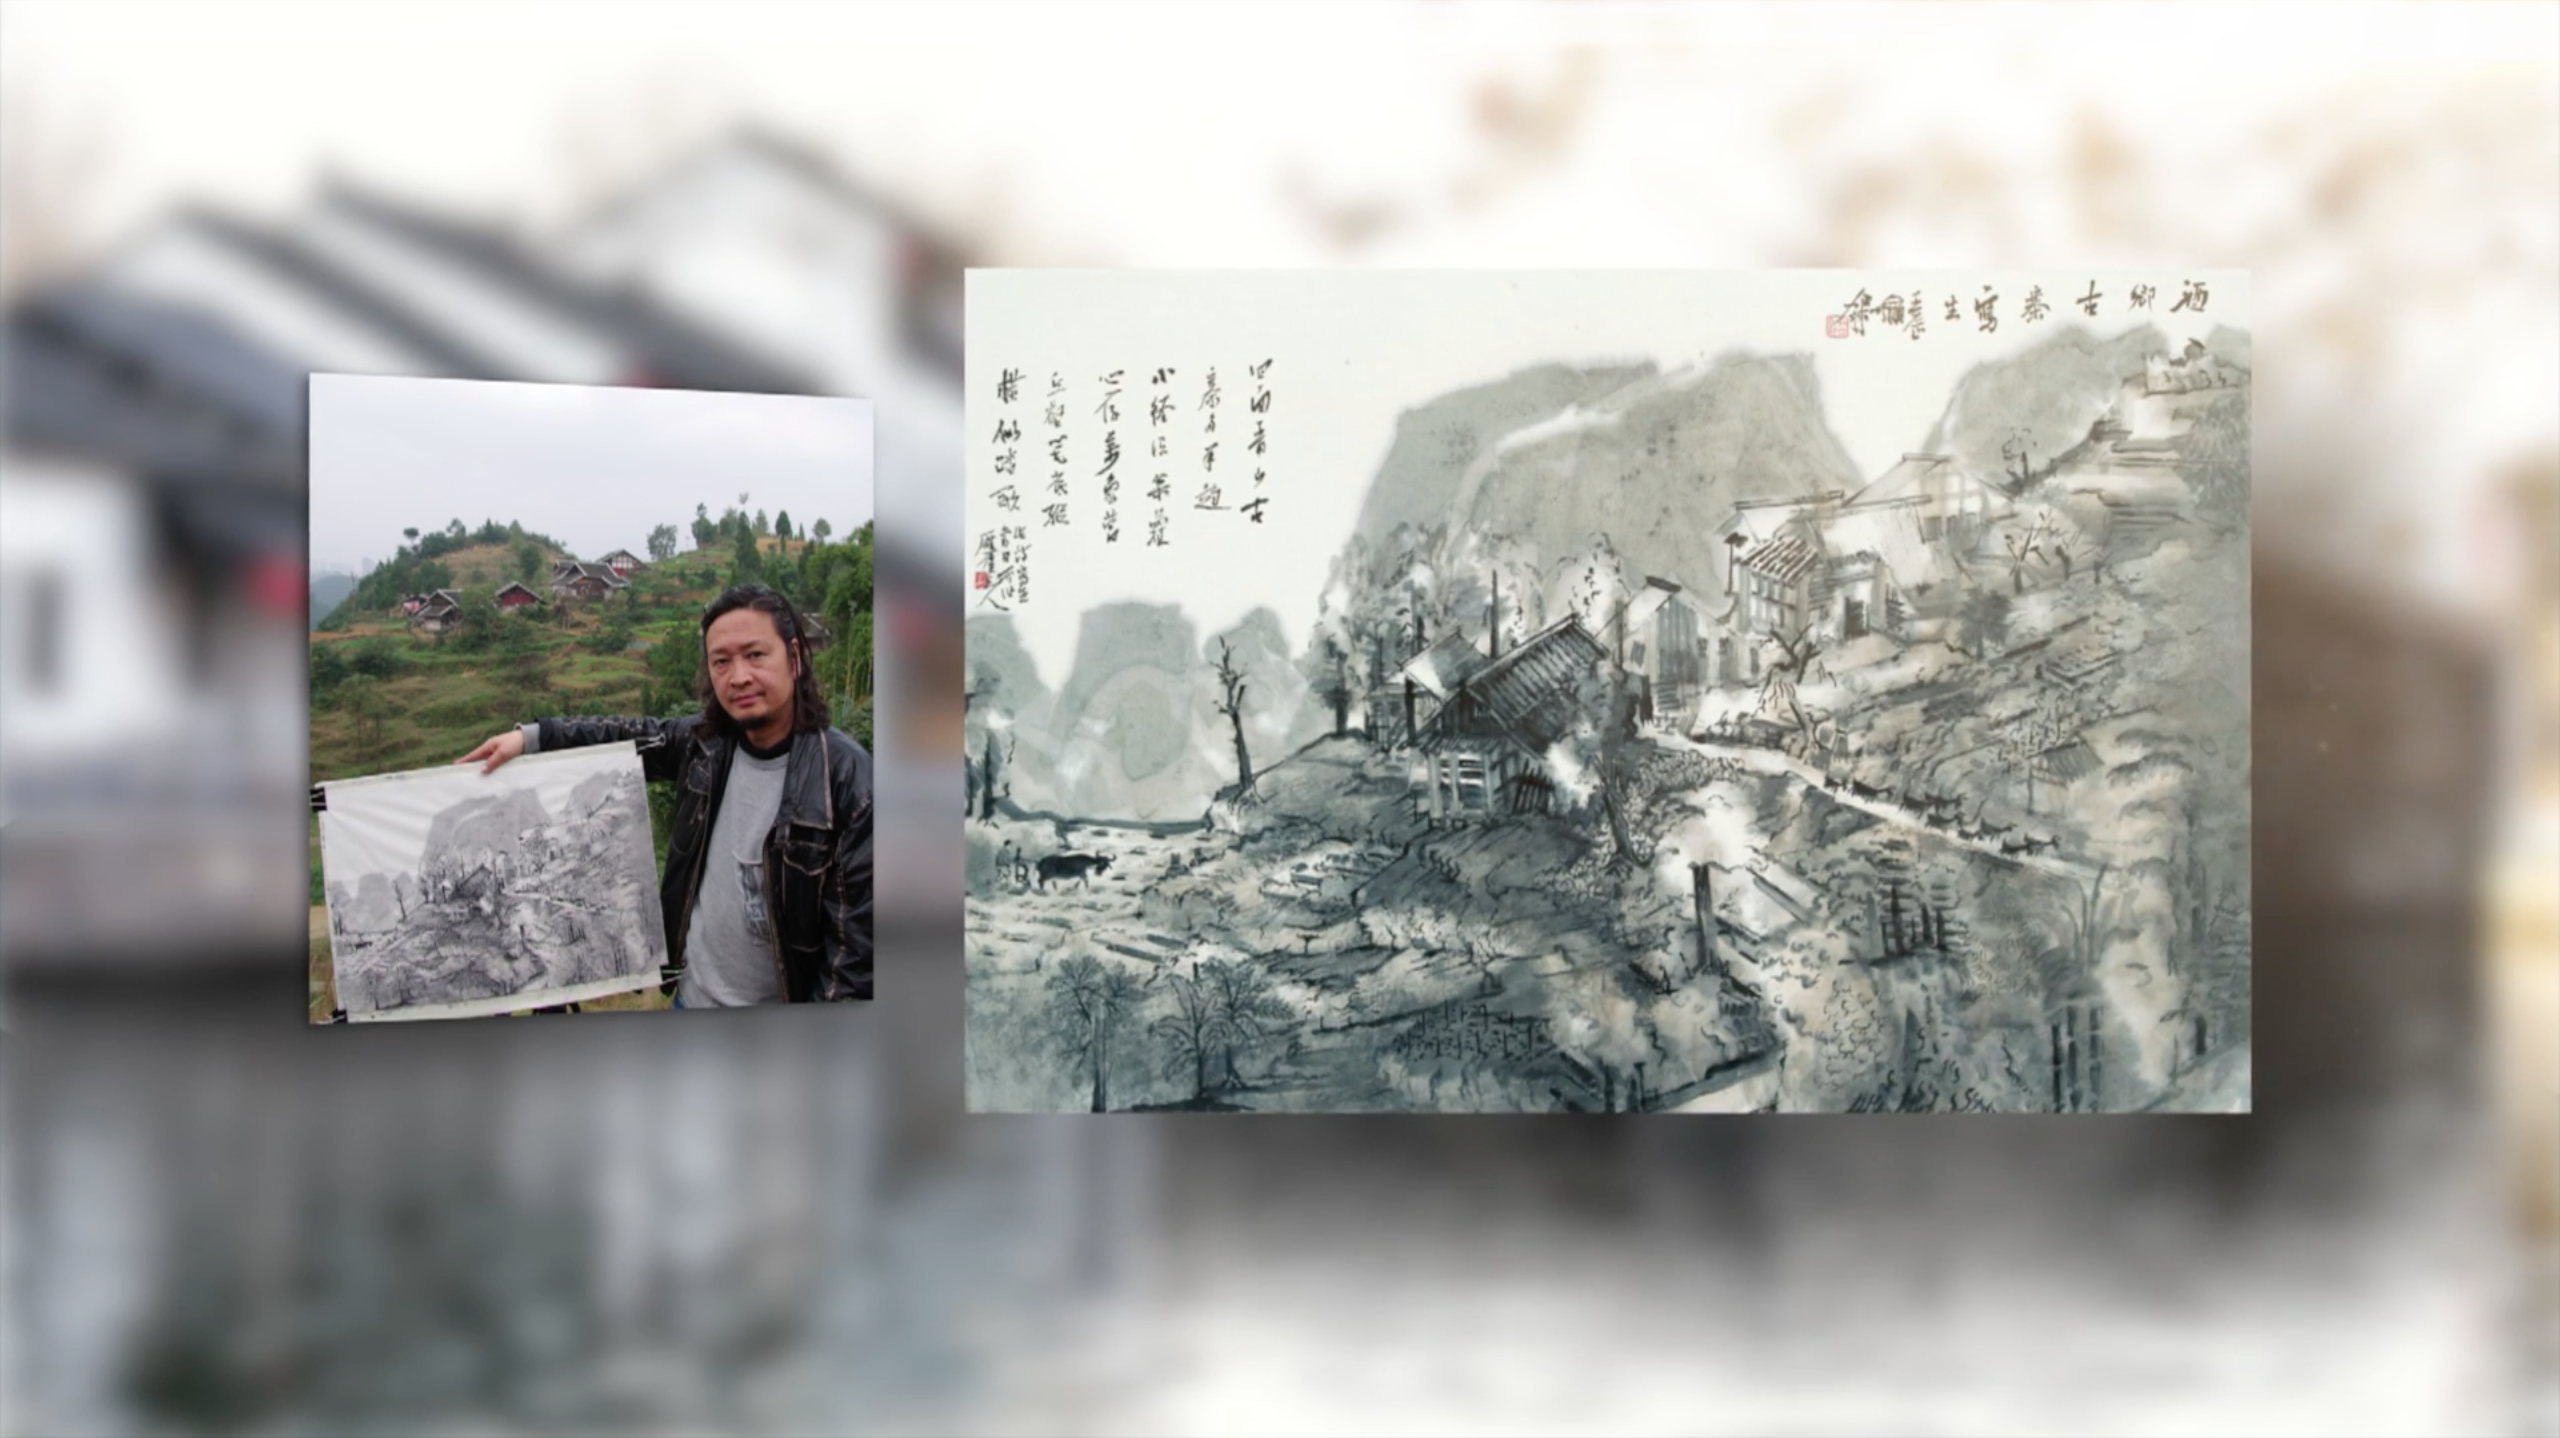 He Jialin produced sketches of many ancient villages during his travels around China. /CGTN